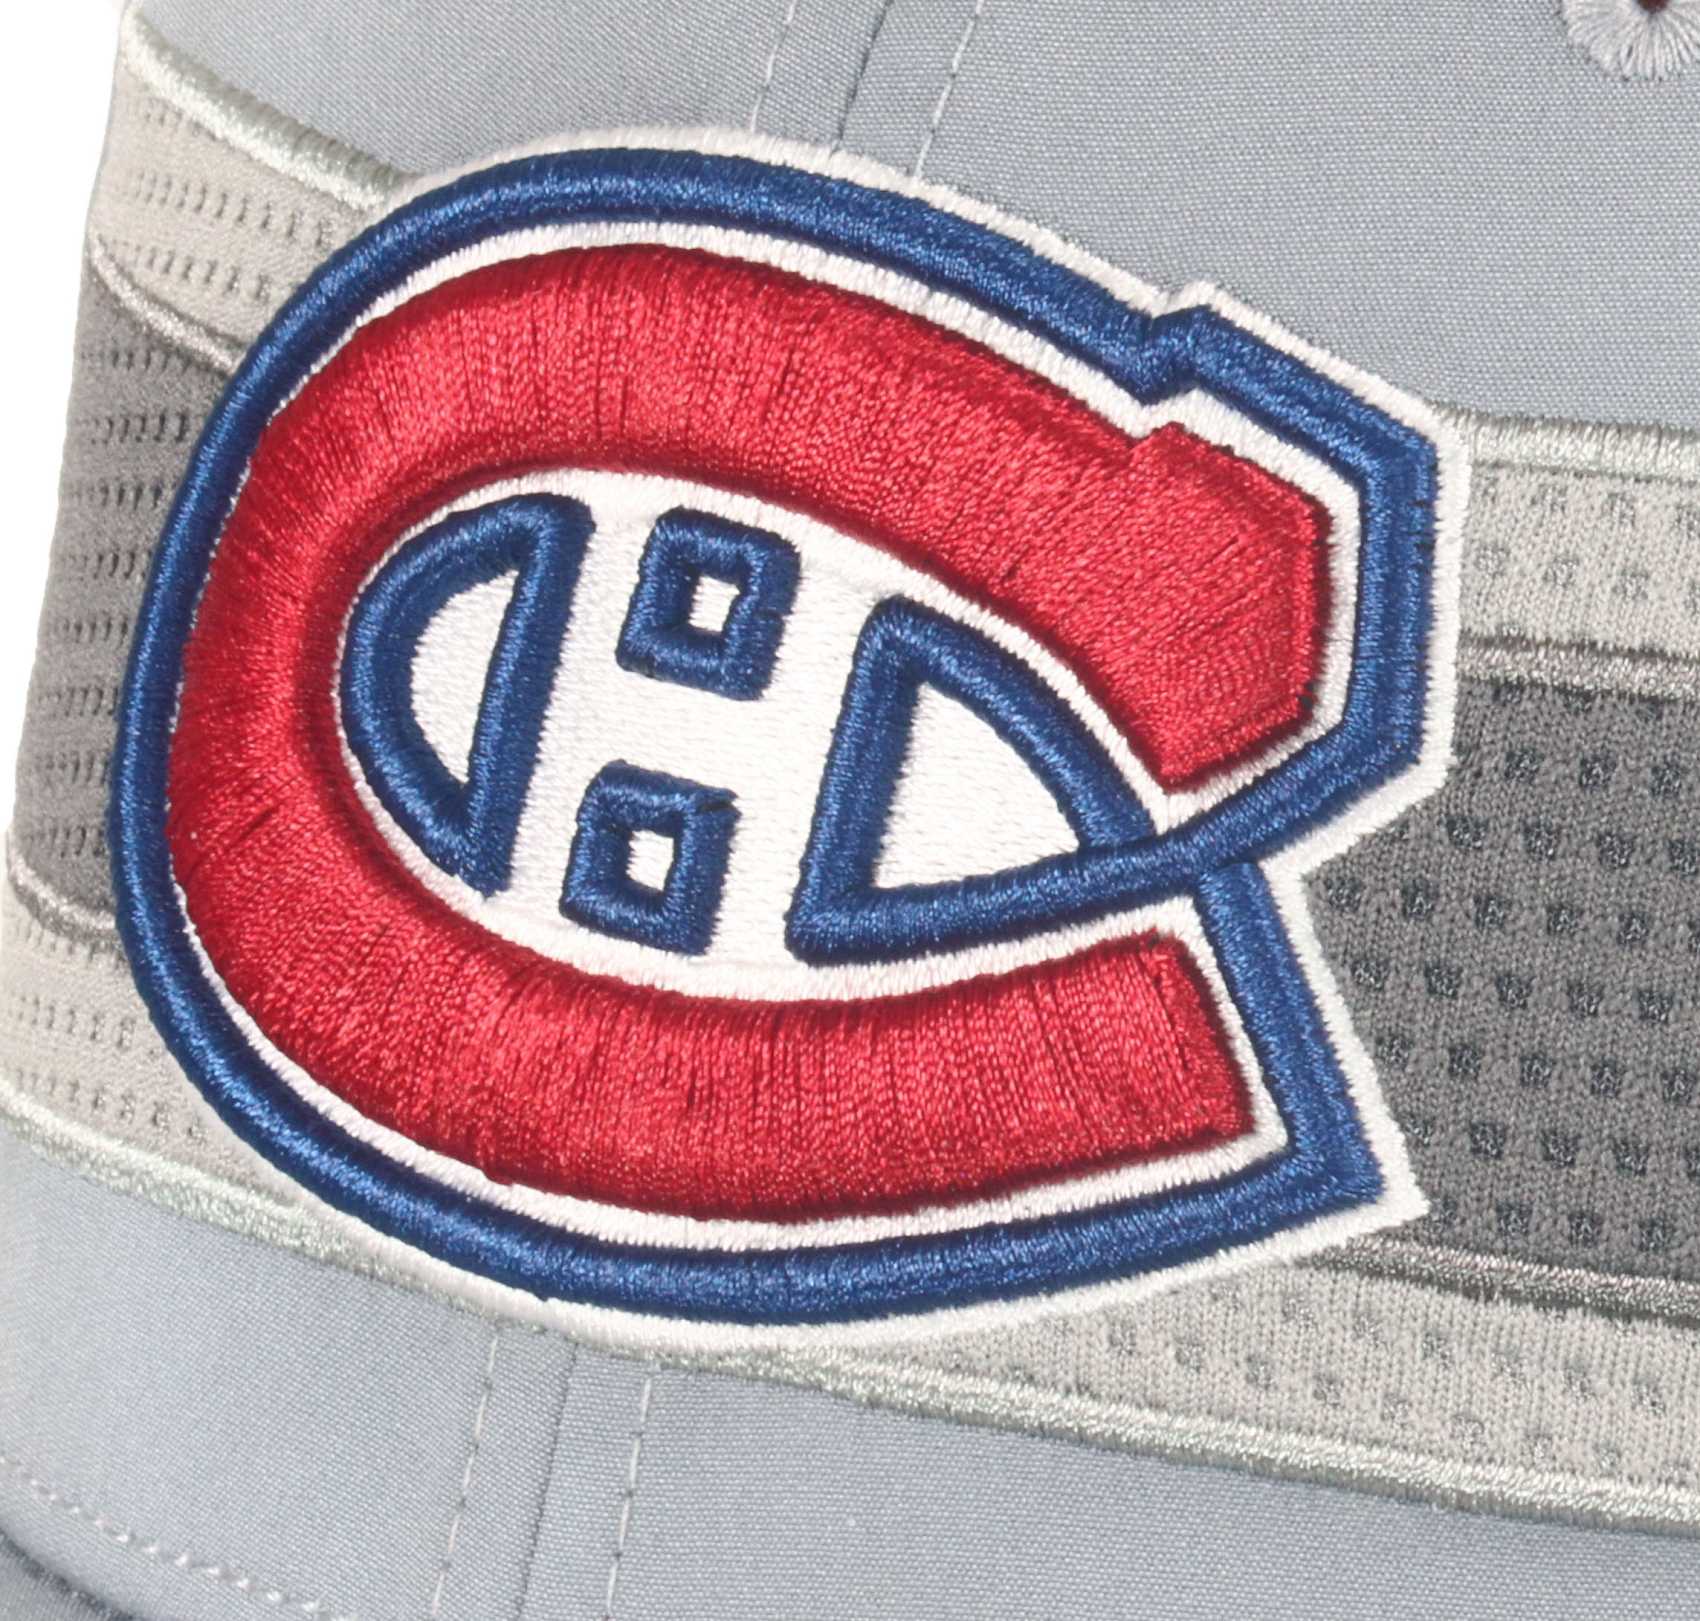 Montreal Canadiens NHL Authentic Pro Home Ice Structured Curved Snapback Cap Grey Fanatics